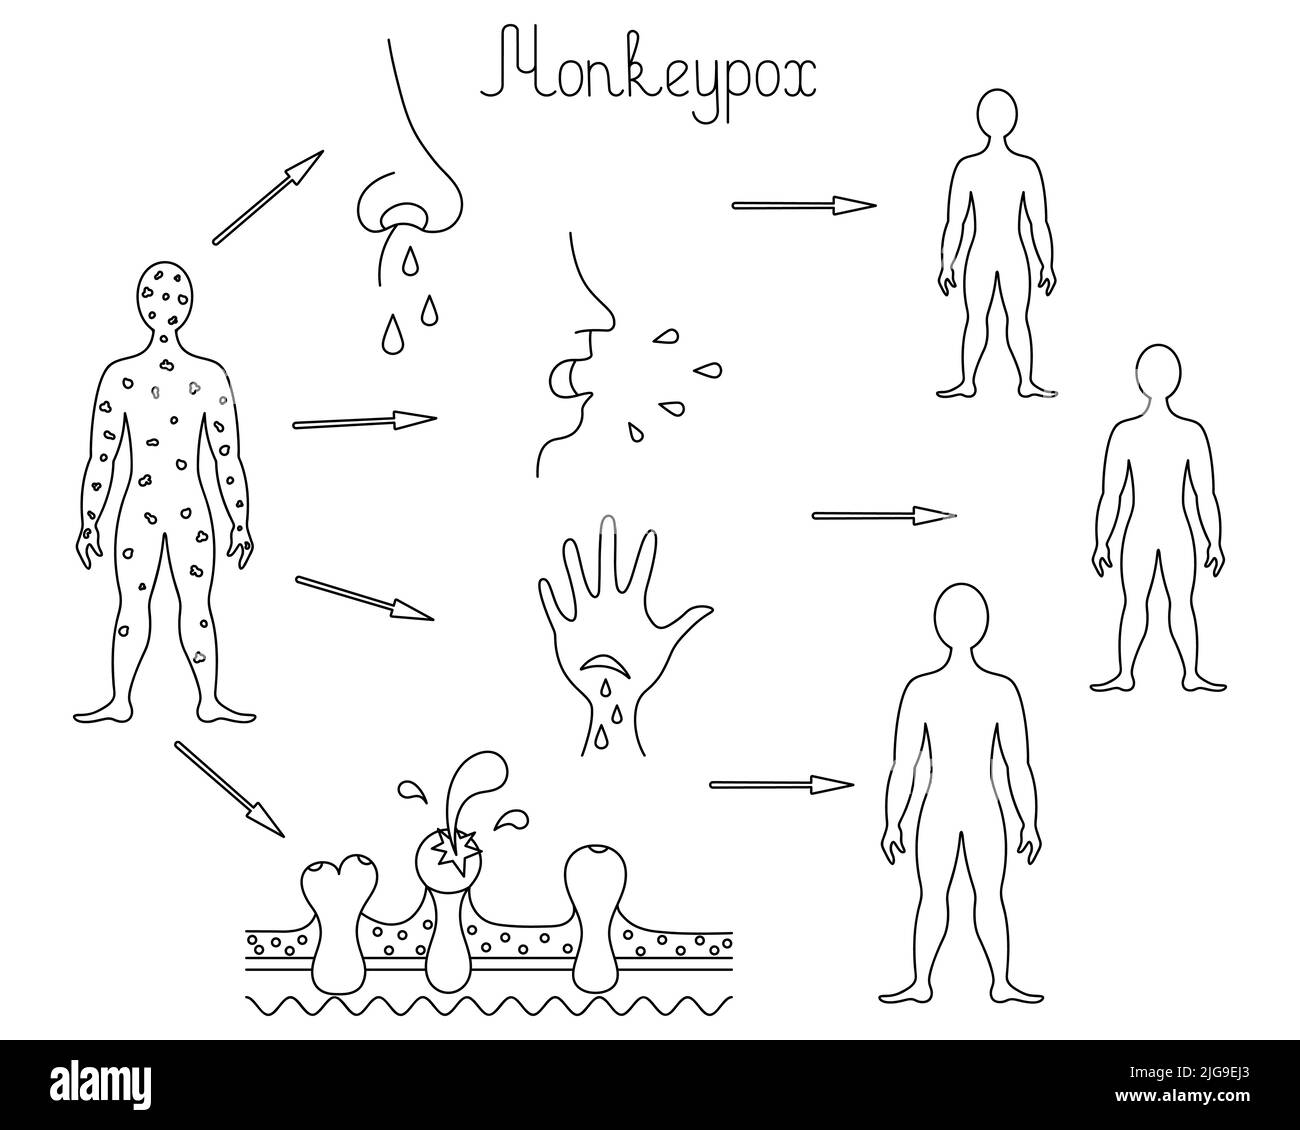 Methods of human infection with monkey pox, transmission of smallpox from person to person Stock Vector